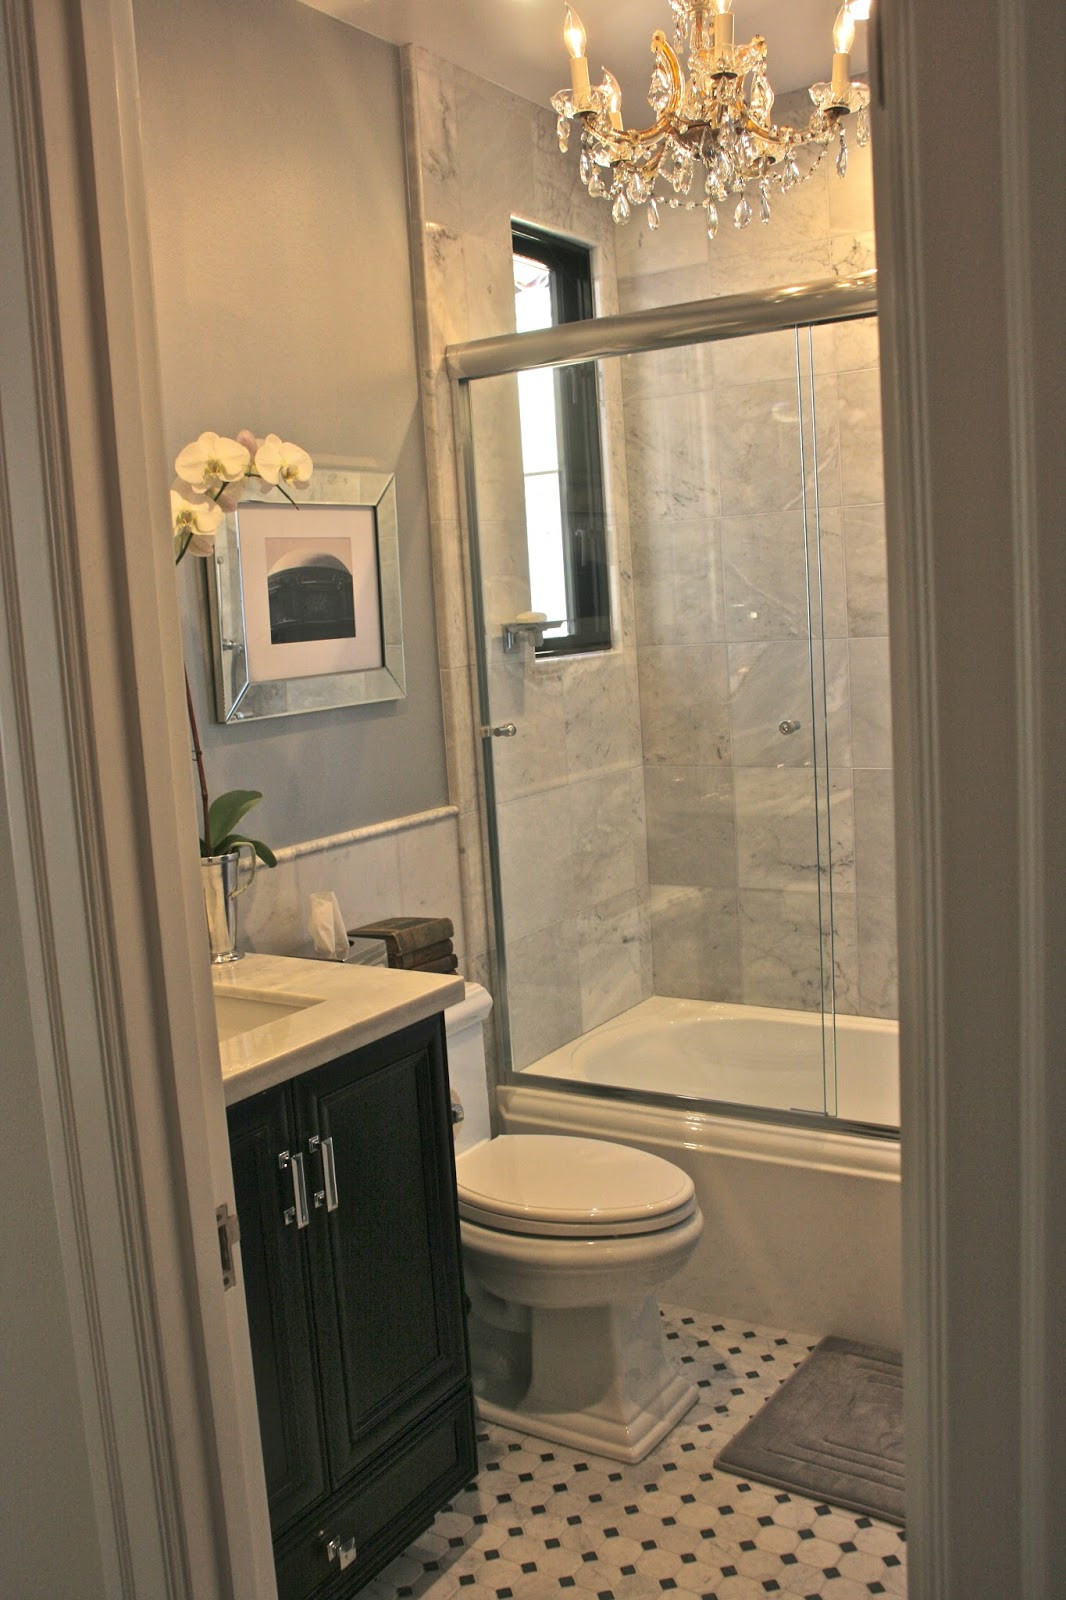 Bathroom Shower Ideas
 vignette design A Night At The Boxwood House